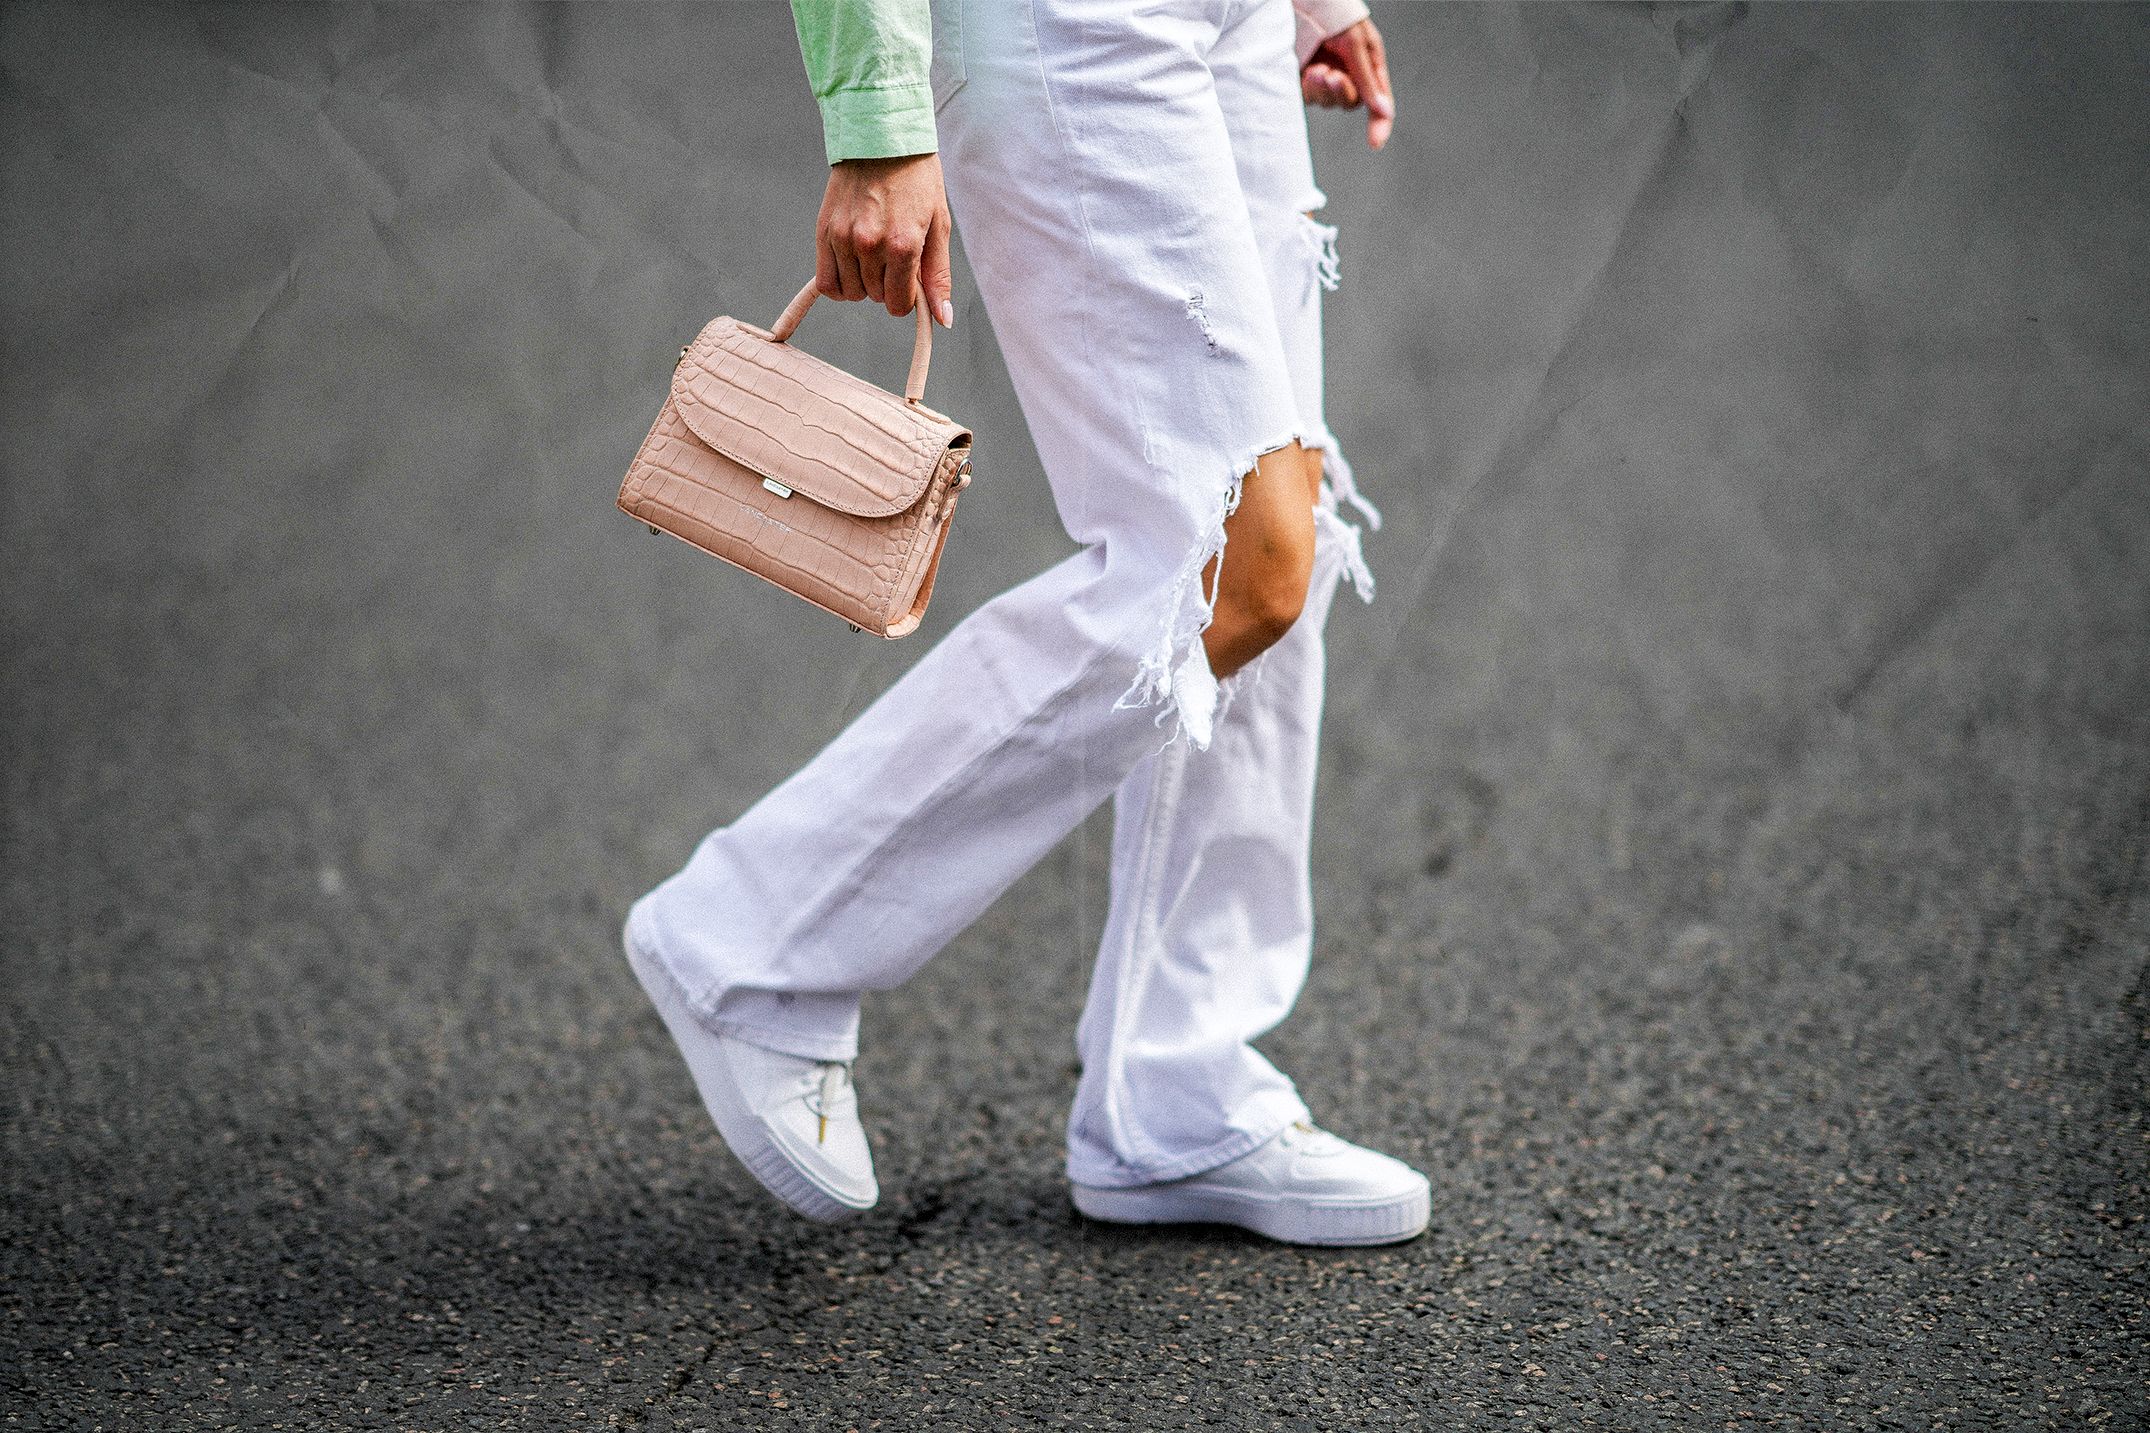 What To Wear Wednesday: White Jeans Outfits - the Flexman Flat